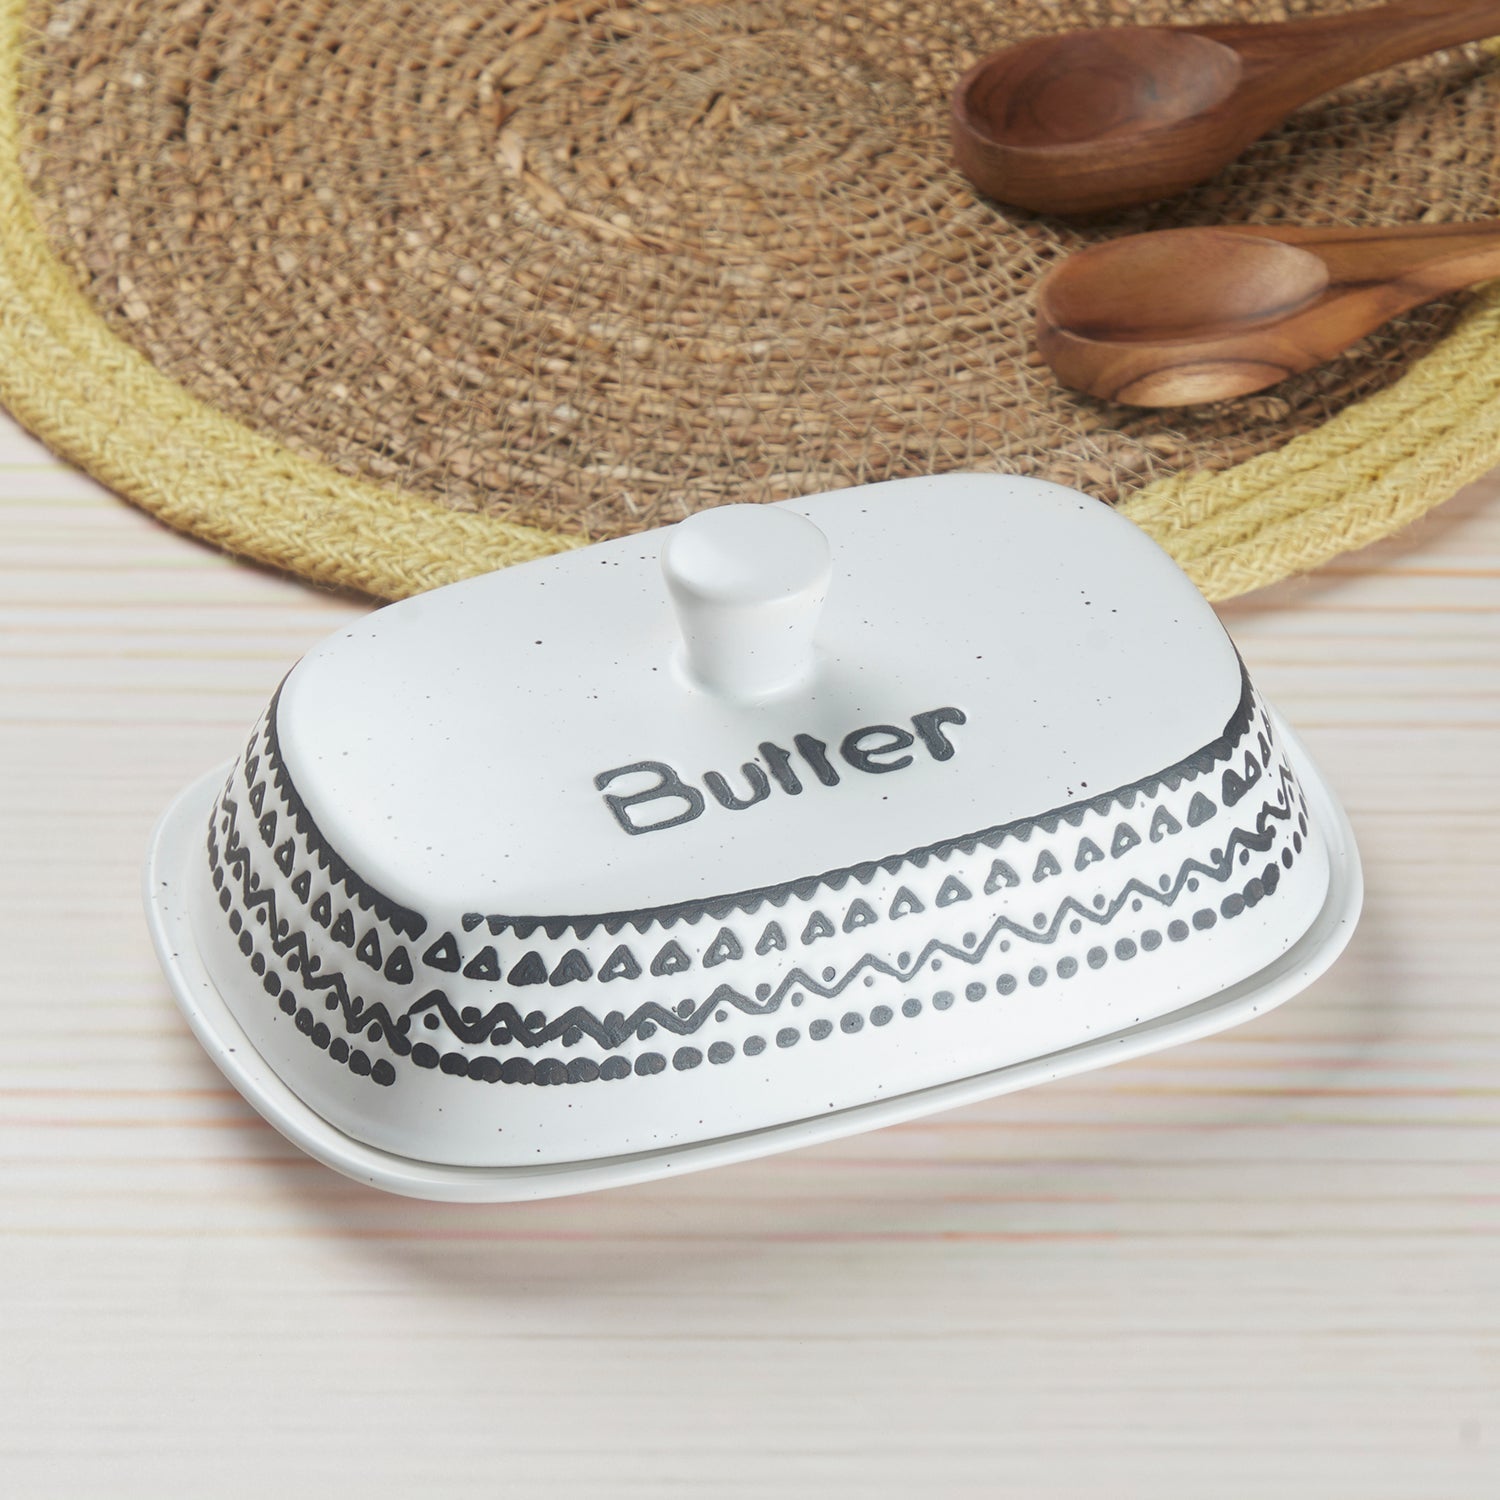 Kookee Ceramic Butter Dish Tray with Lid with 250g capacity for Kitchen, Dining Table and Restaurants (8618)